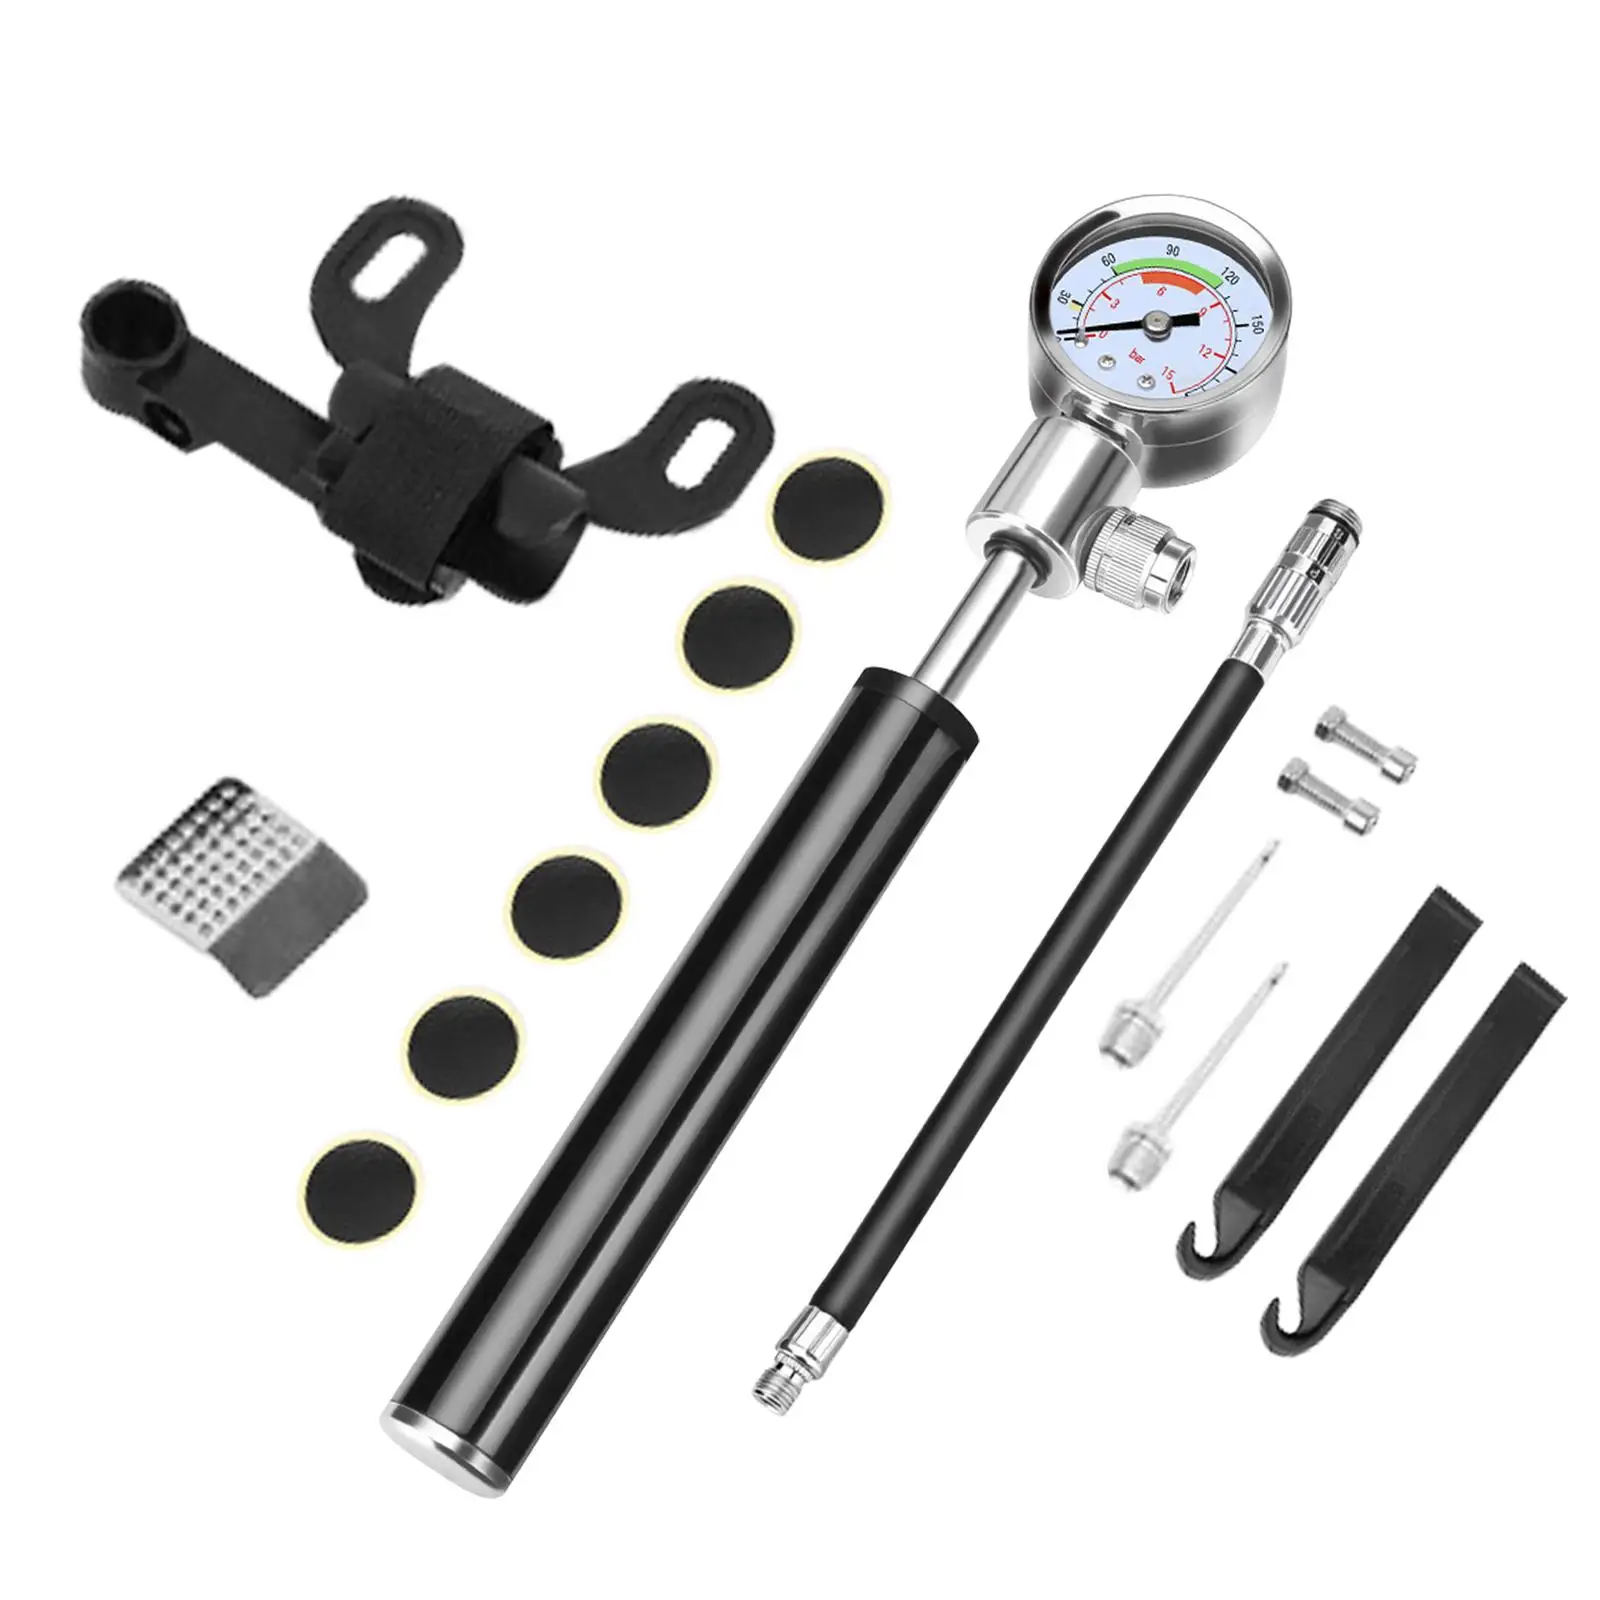 Portabale Bicycle Pump Inflator Pump Bicycle Accessories for Football Balls,